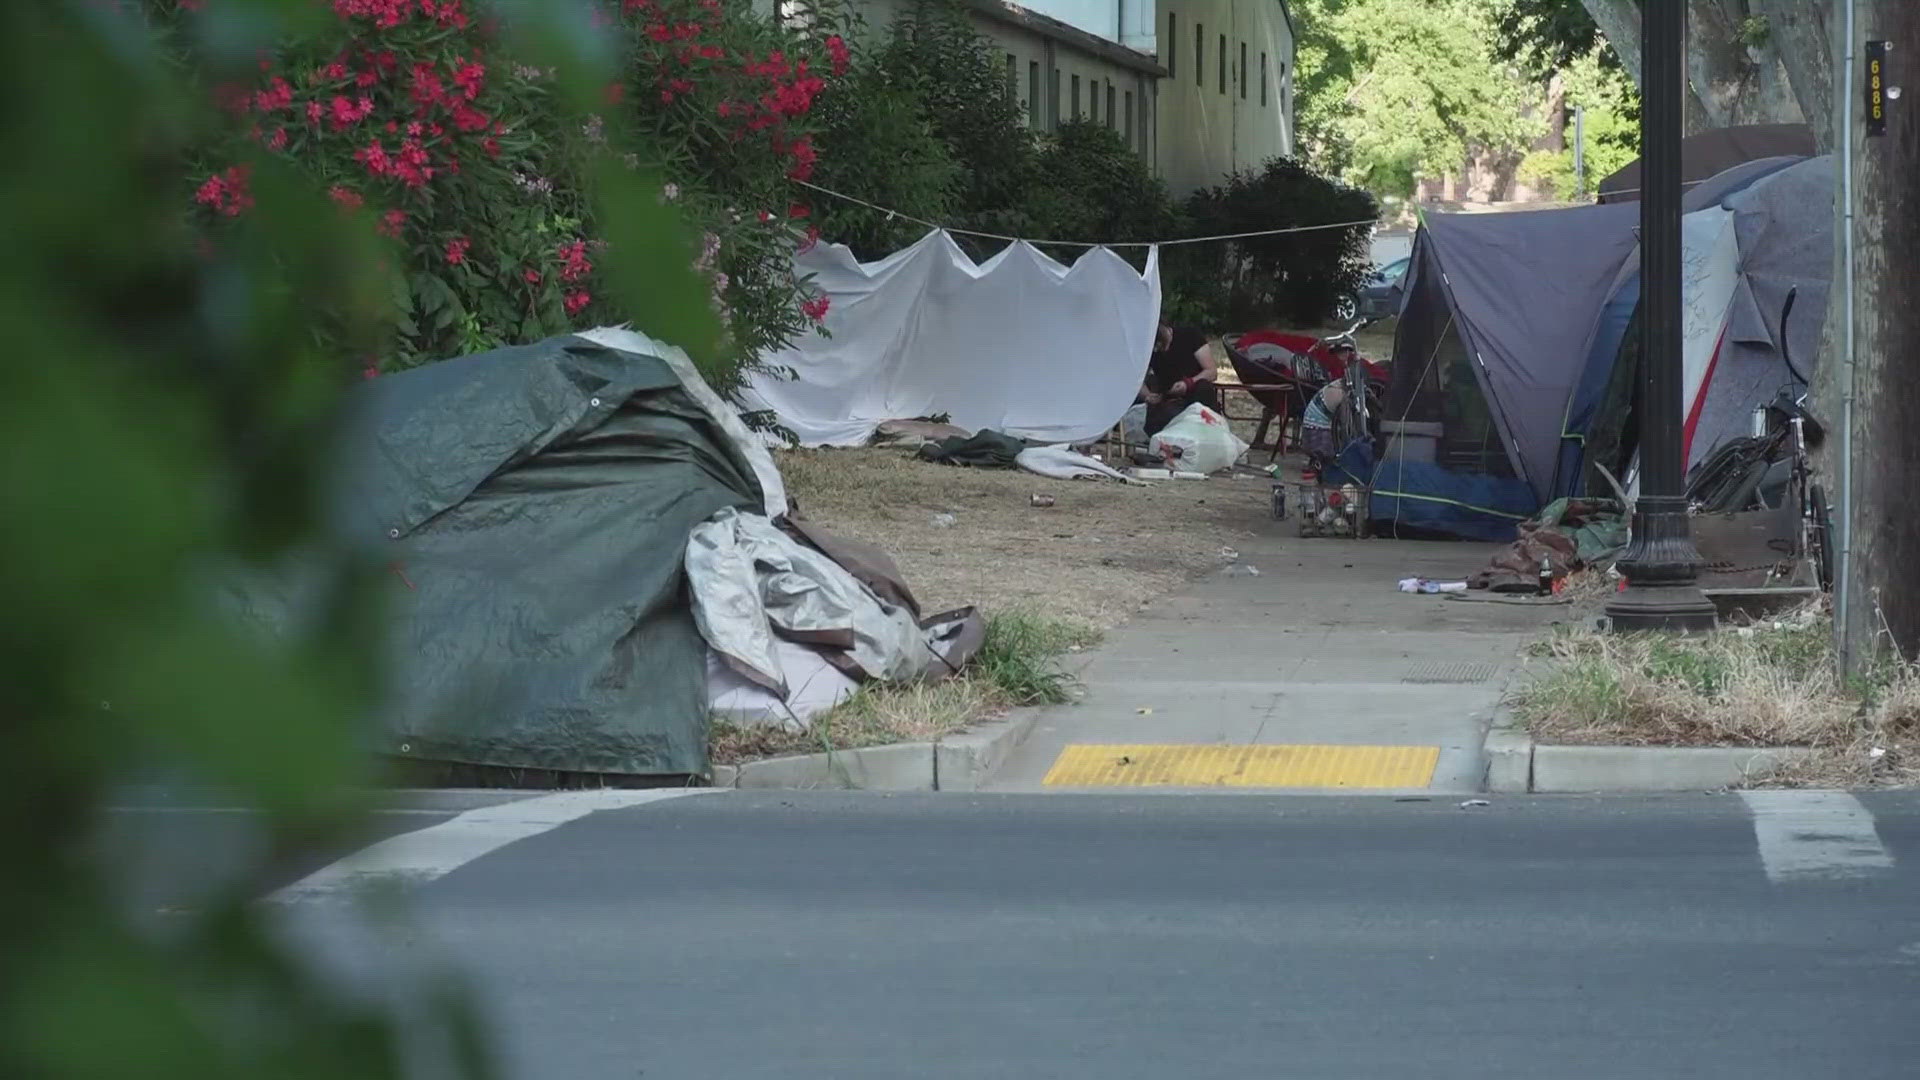 Cities can enforce bans on homeless people sleeping outdoors despite the lack of shelter space in some areas.